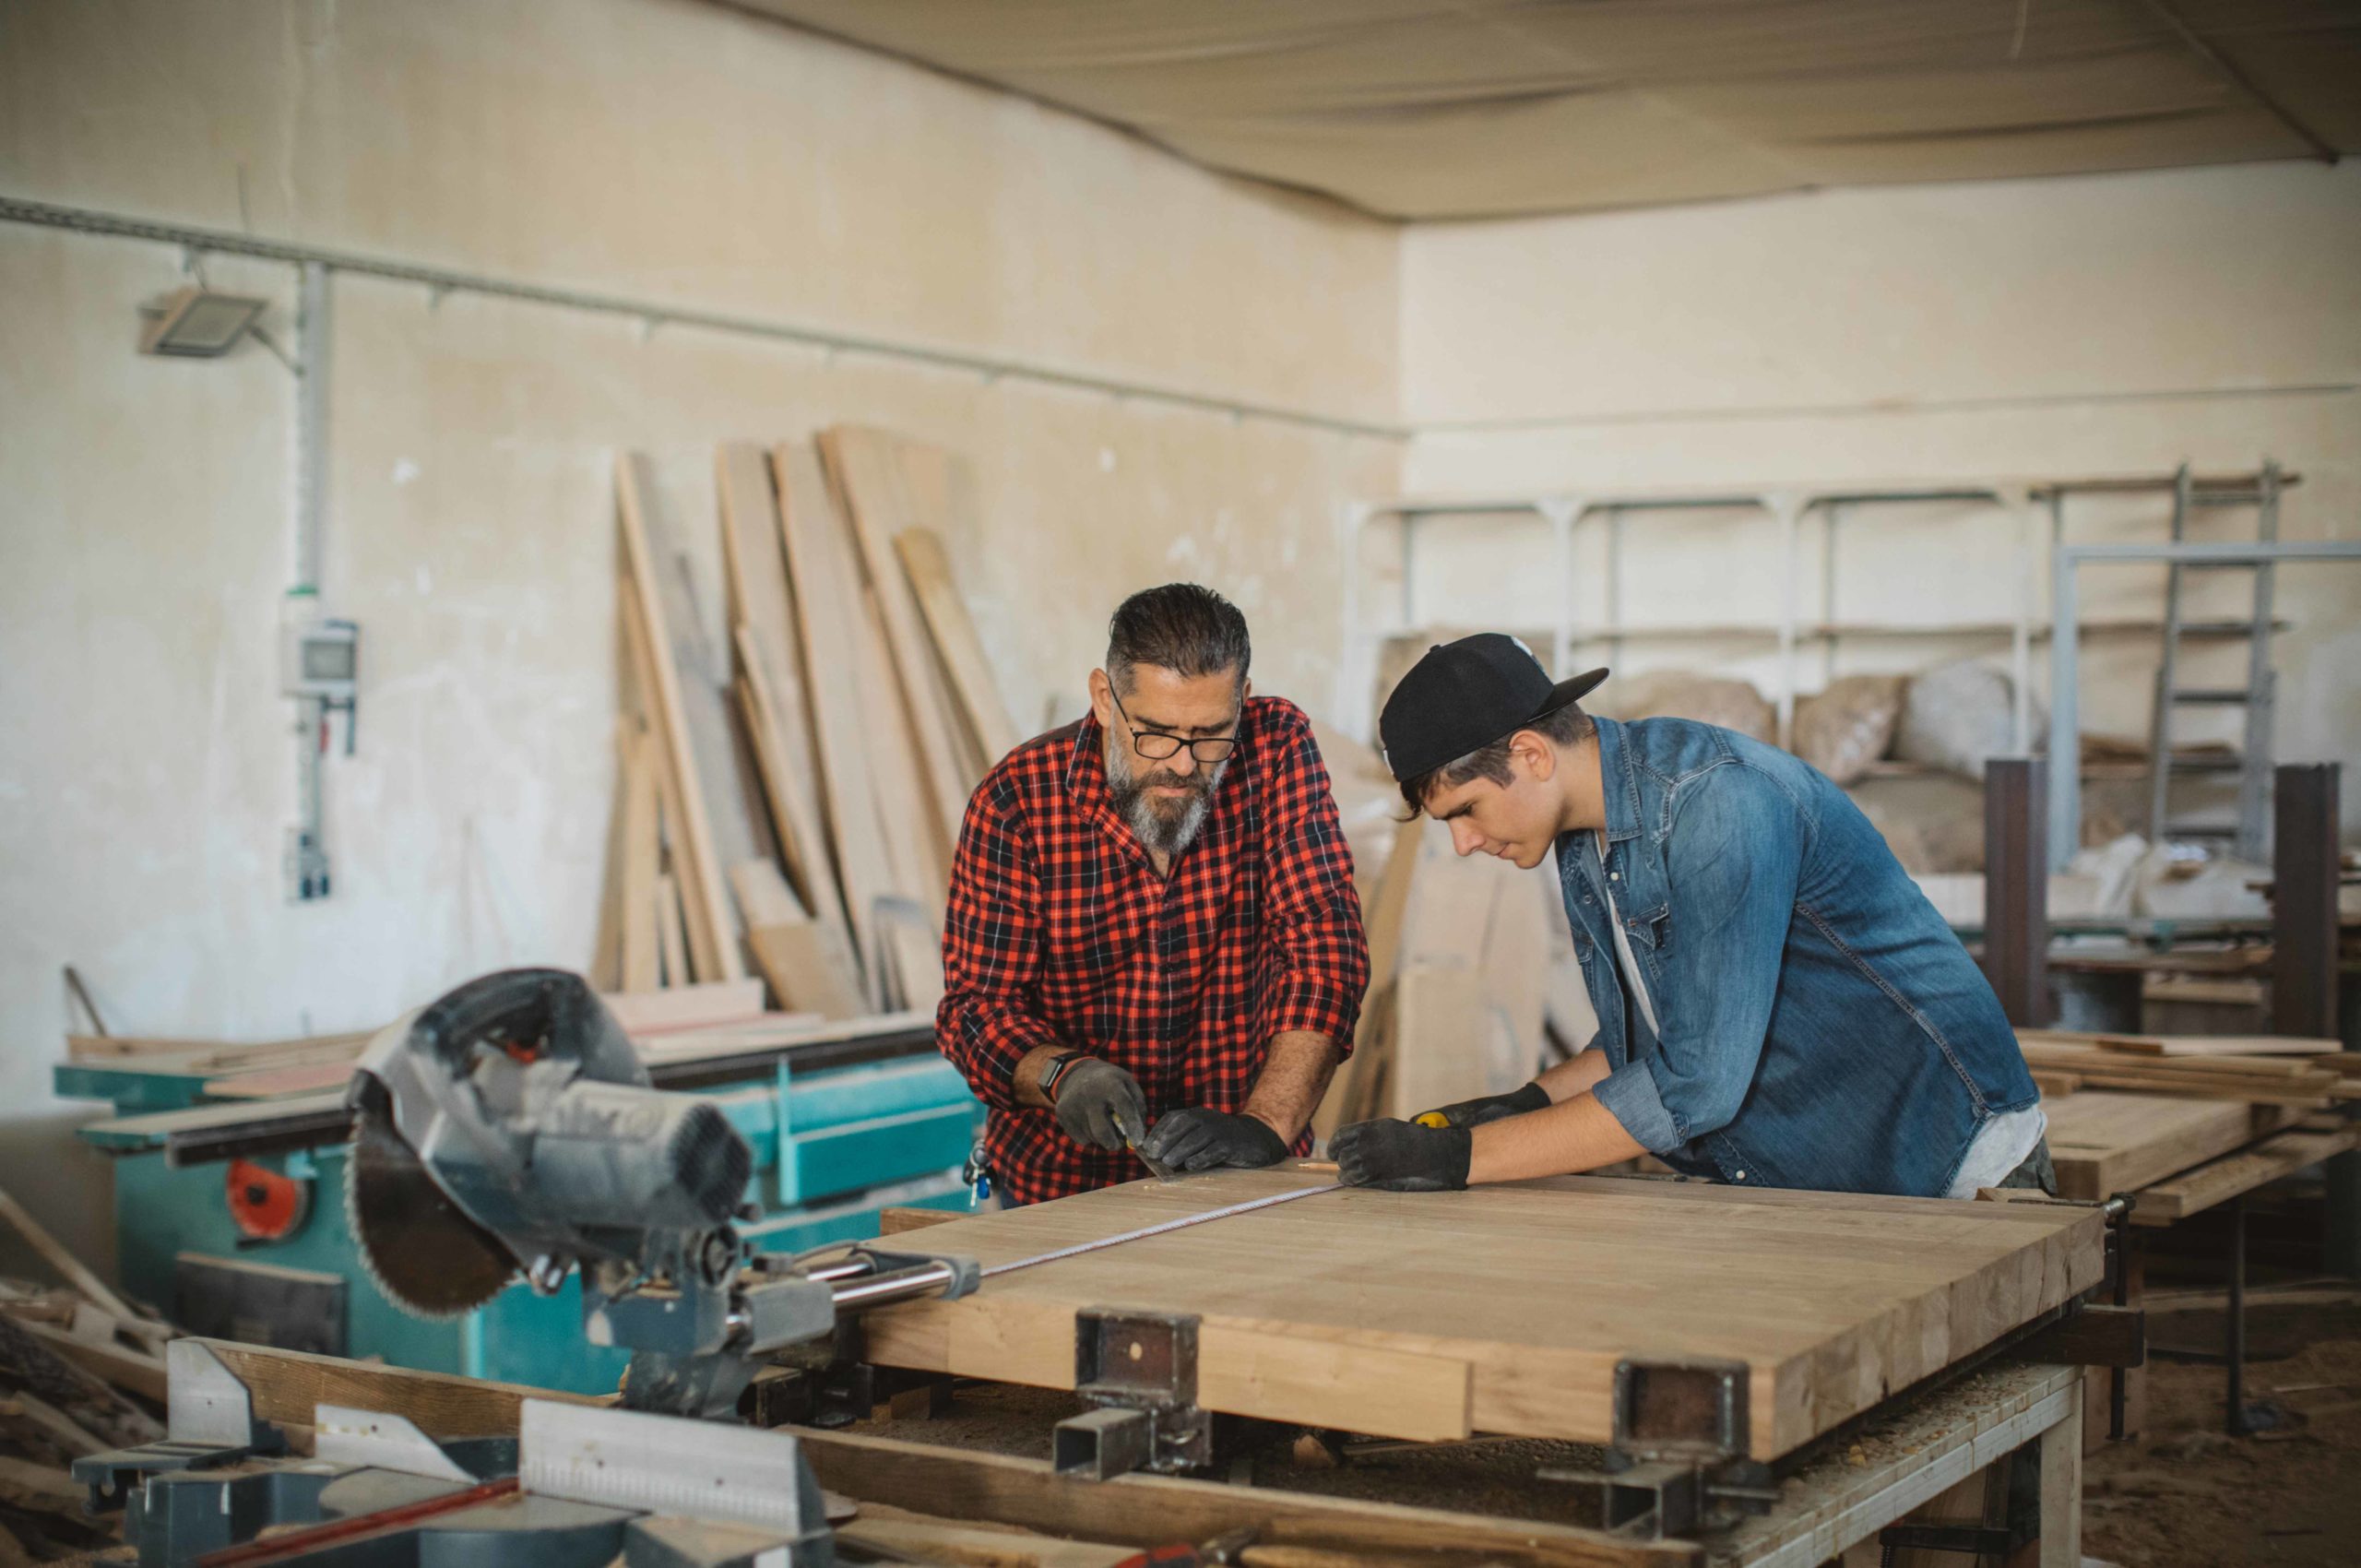 Father and son work together in a wood shop.